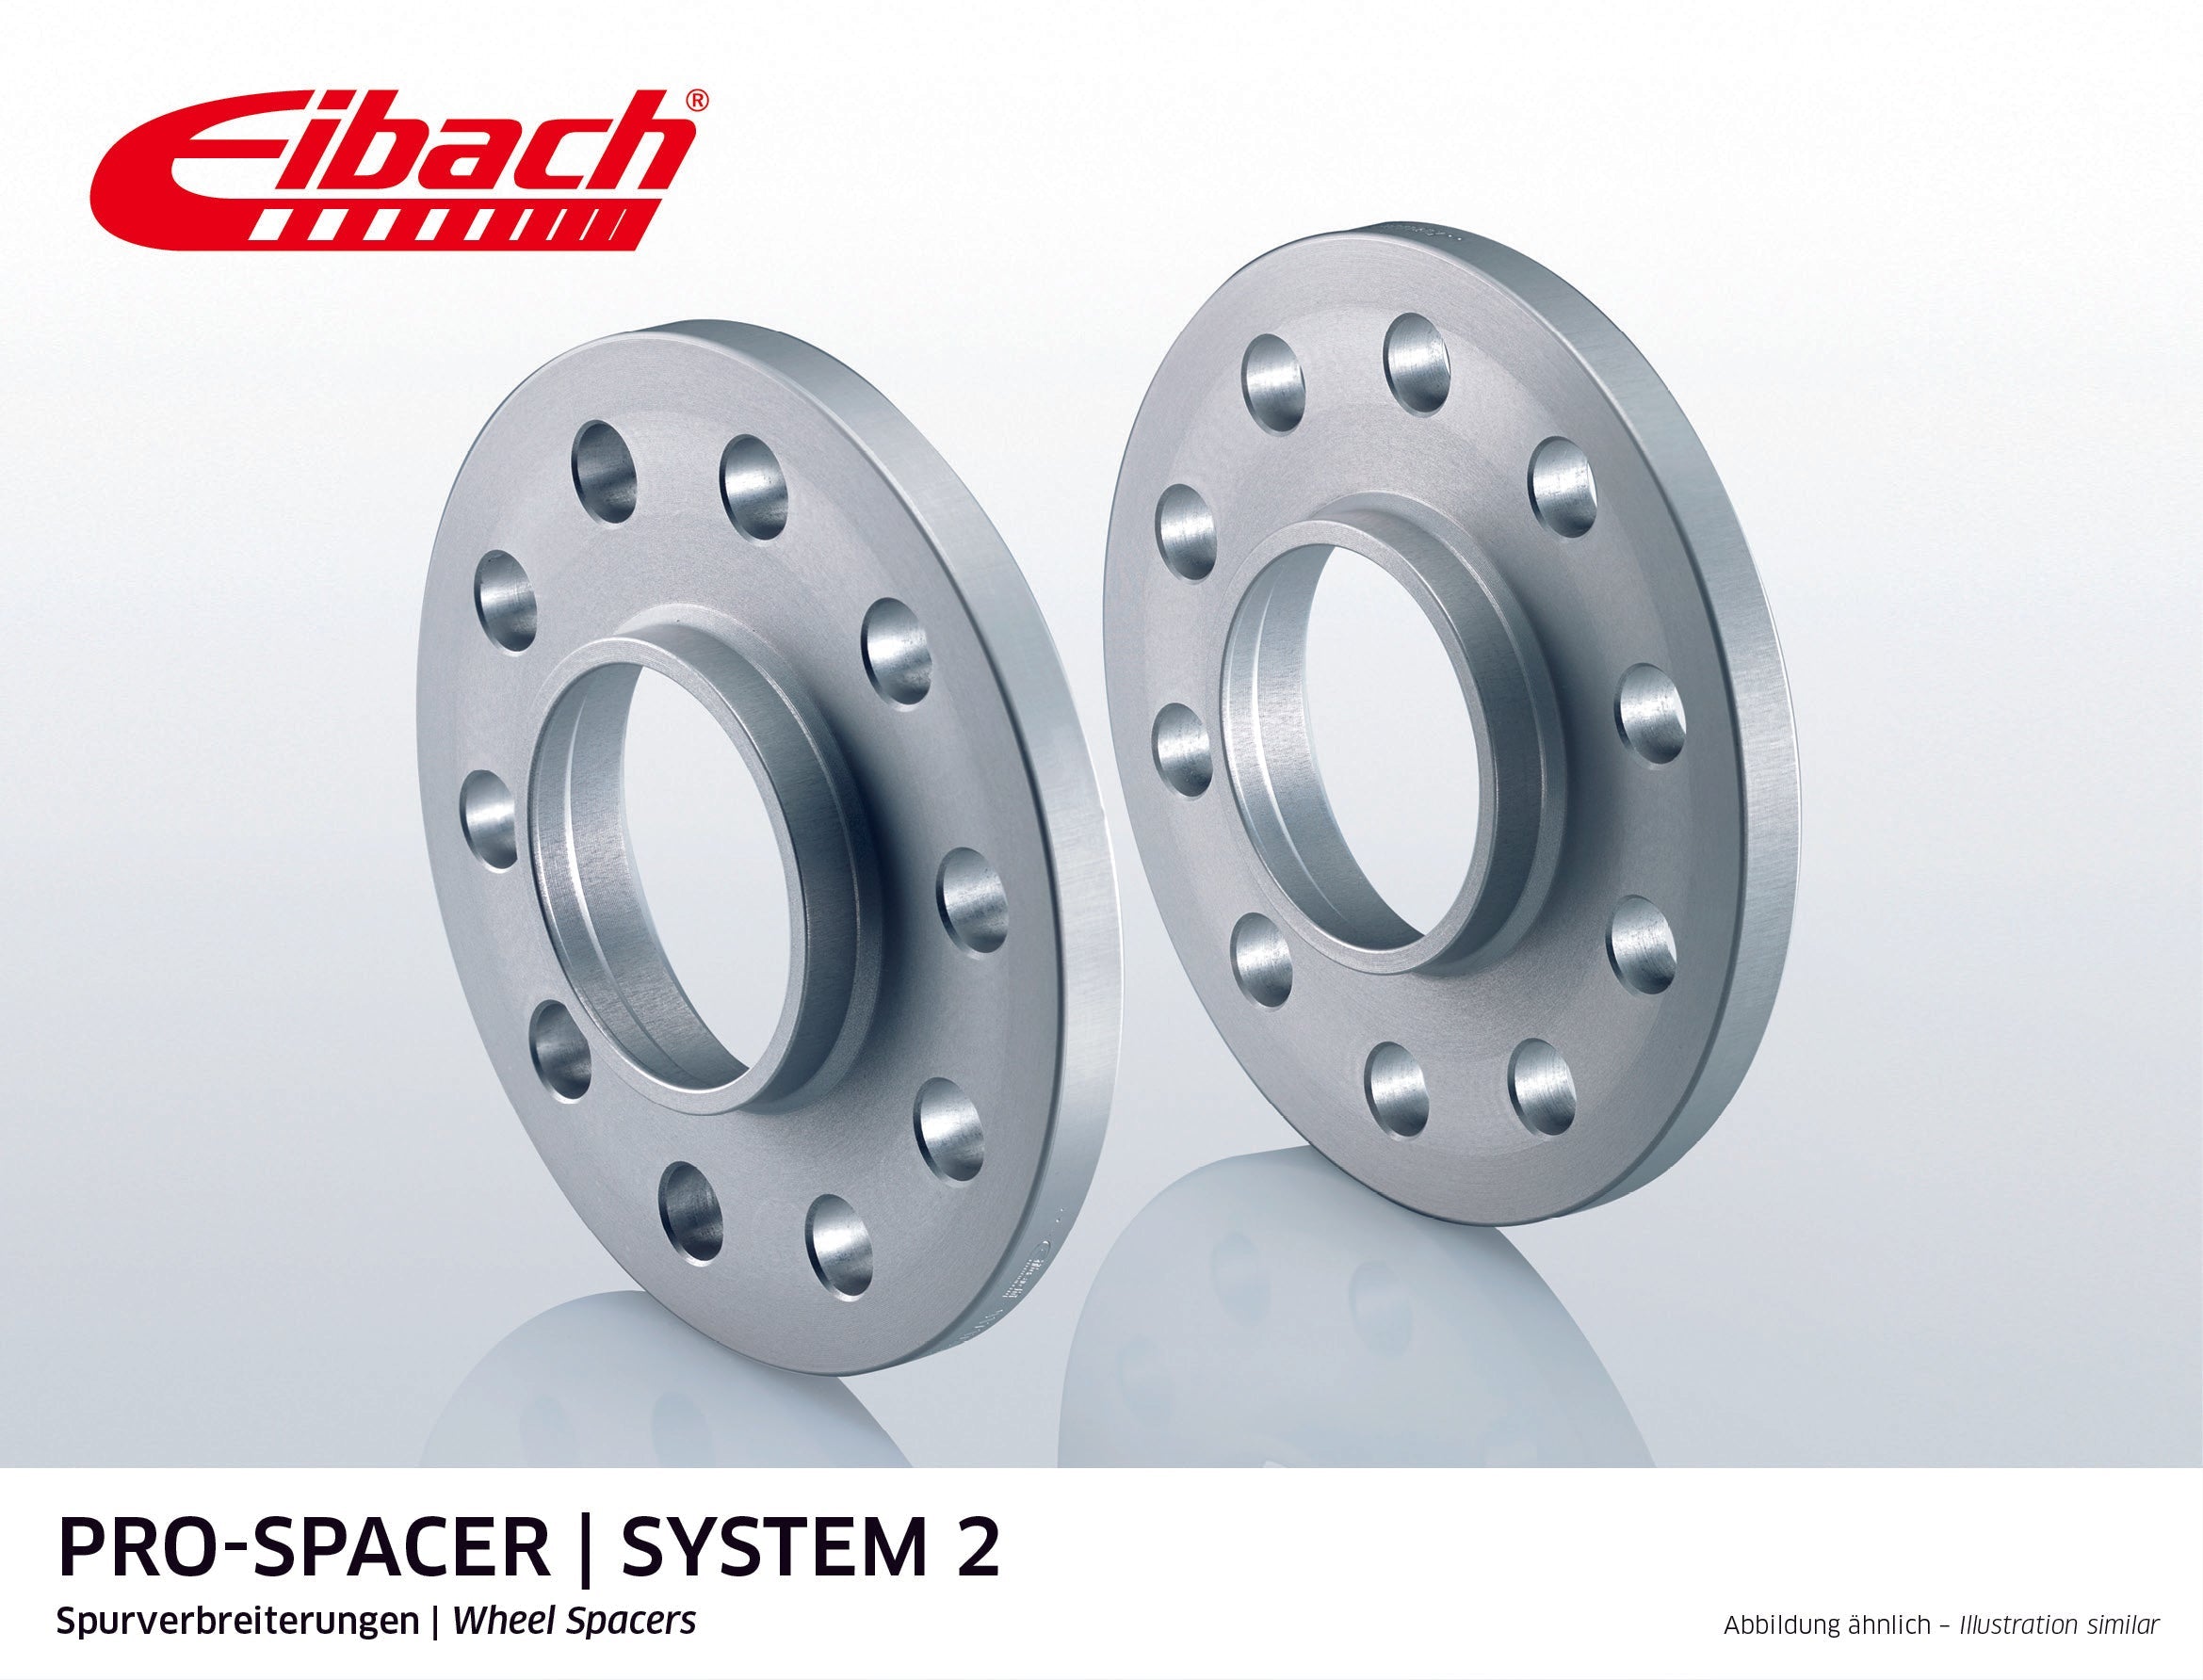 Eibach Pro-Spacer Kit (Pair Of Spacers) 16mm Per Spacer (System 2)  S90-2-16-011 (Silver)